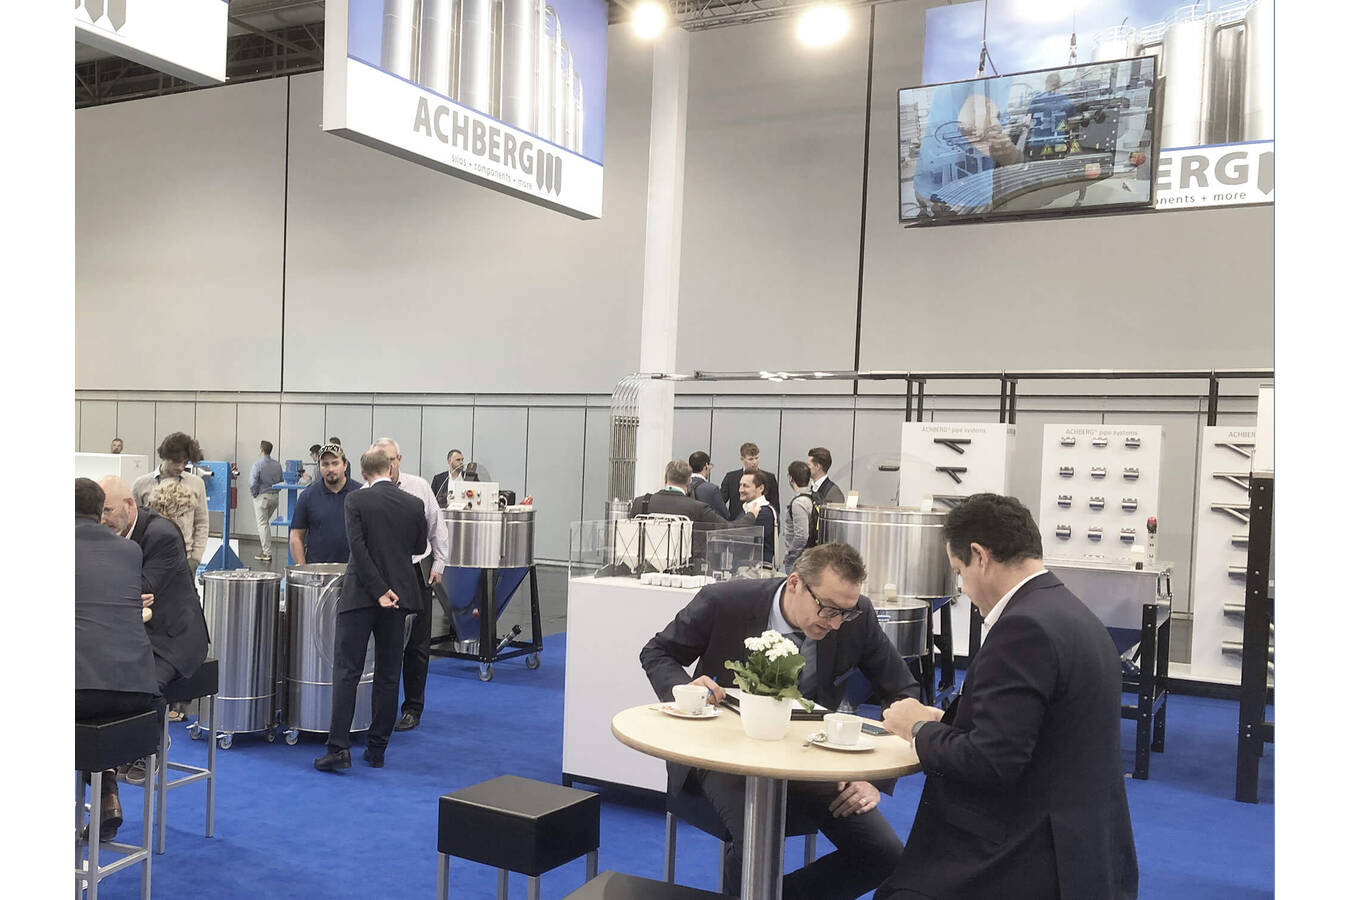 Complete success at K-2022 The expectations of Siloanlagen Achberg were clearly exceeded at this year’s K trade fair in Düsseldorf. The new stand concept and the exhibited products were extremely well received by the expert audience. 